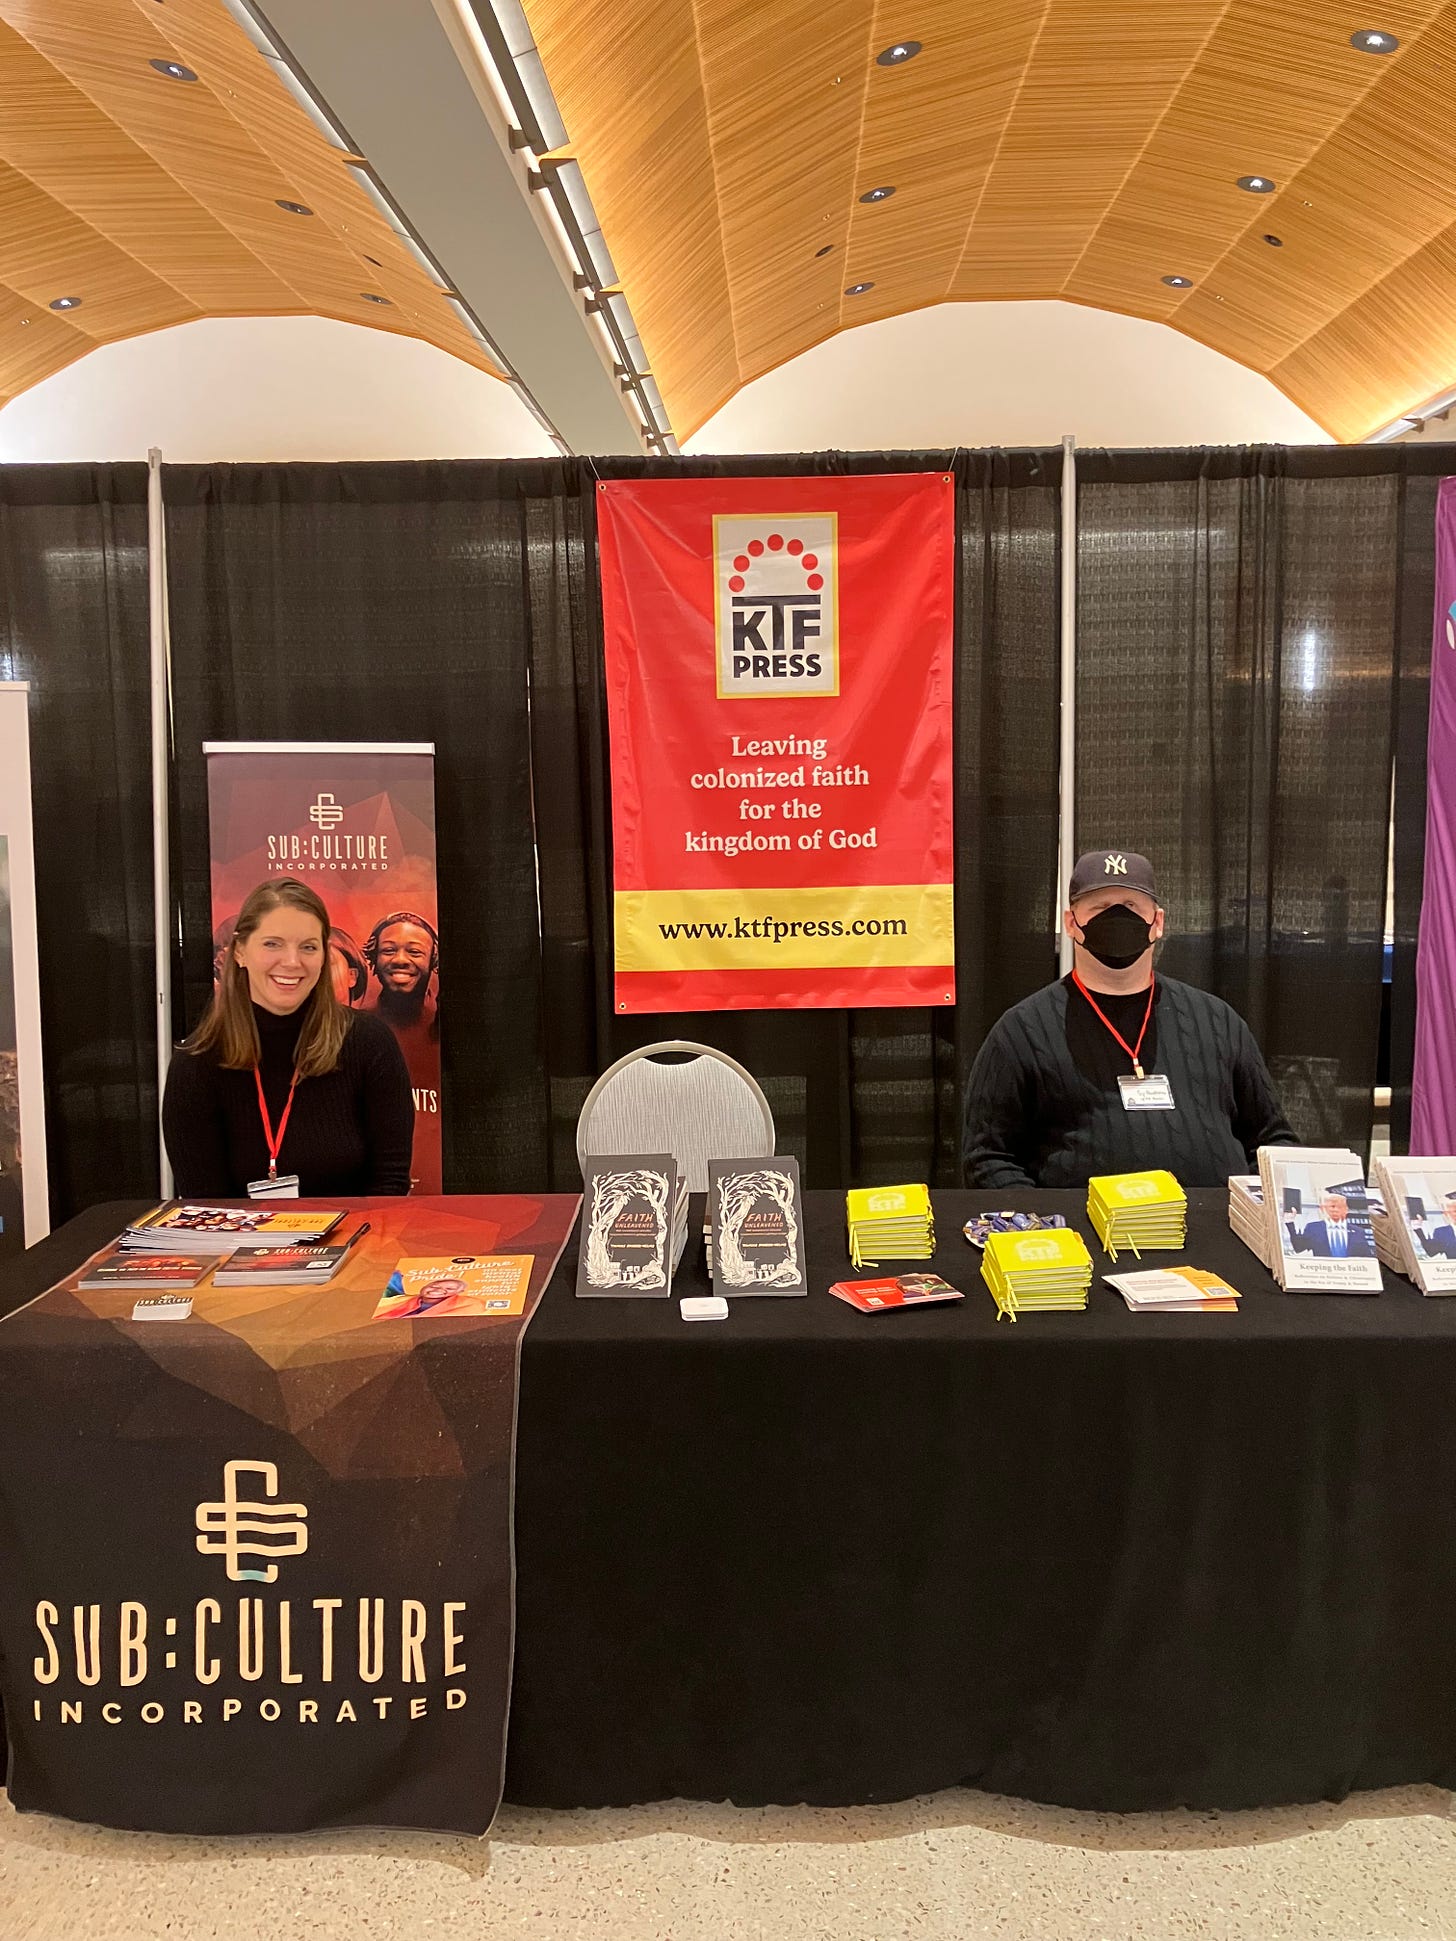 A photo of Sy standing at KTF’s booth at the Evolving Faith Conference. The booth is shared with Sub:Culture, Inc. Tamice’s nonprofit. A tall White woman is also at the booth with Sy standing on the side of the table dedicated to Sub:Culture. KTF’s books and other materials are on the table, and a large sign for KTF is hung behind Sy.